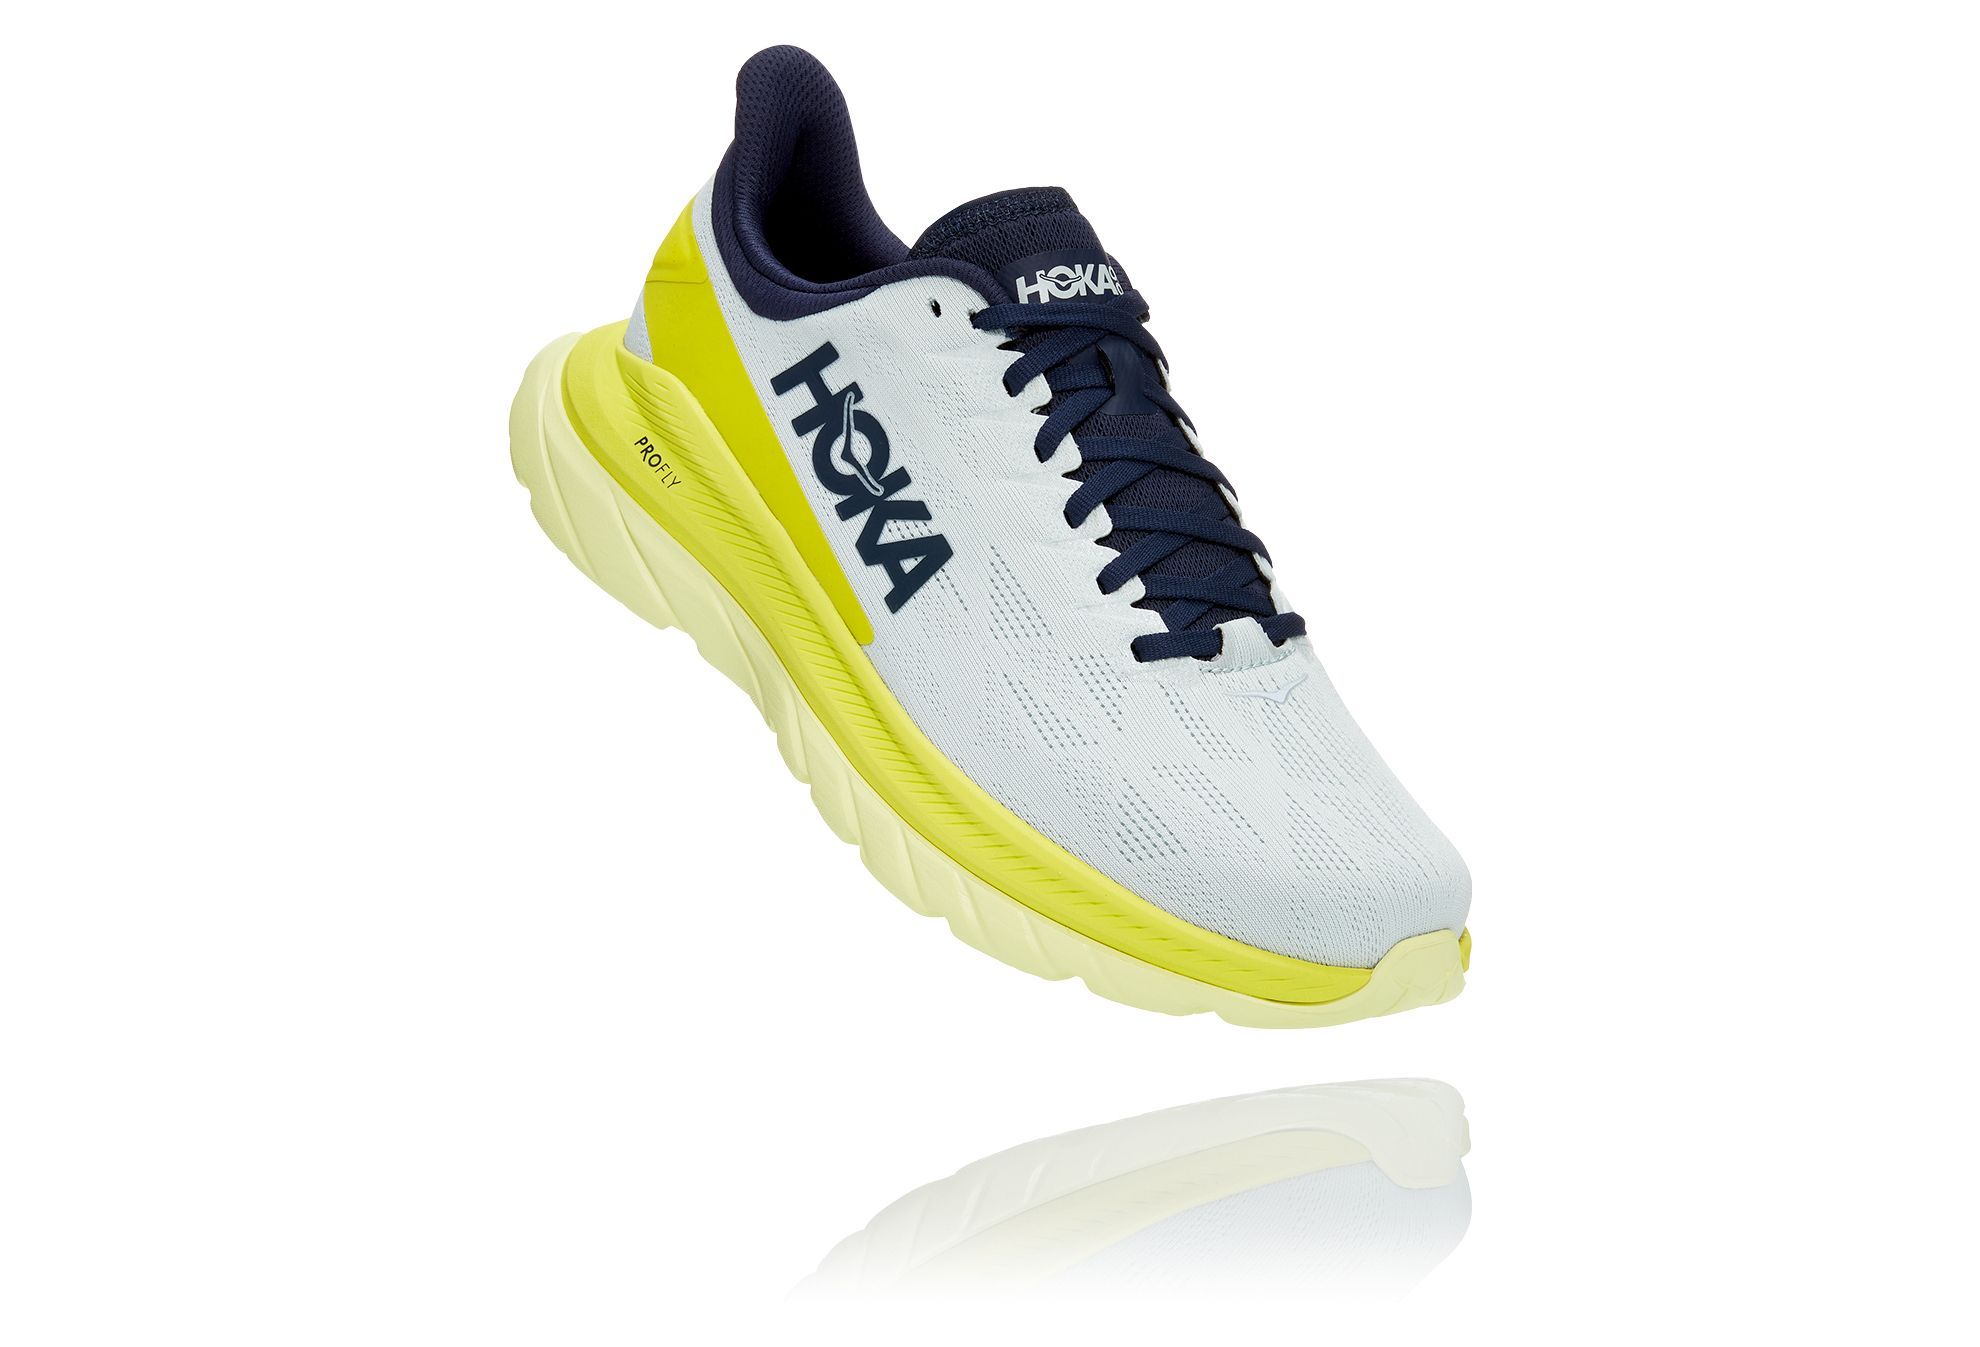 The HOKA Mach 4 is soft, bouncy, and fast for Two-Mile Tuesdays and every day.